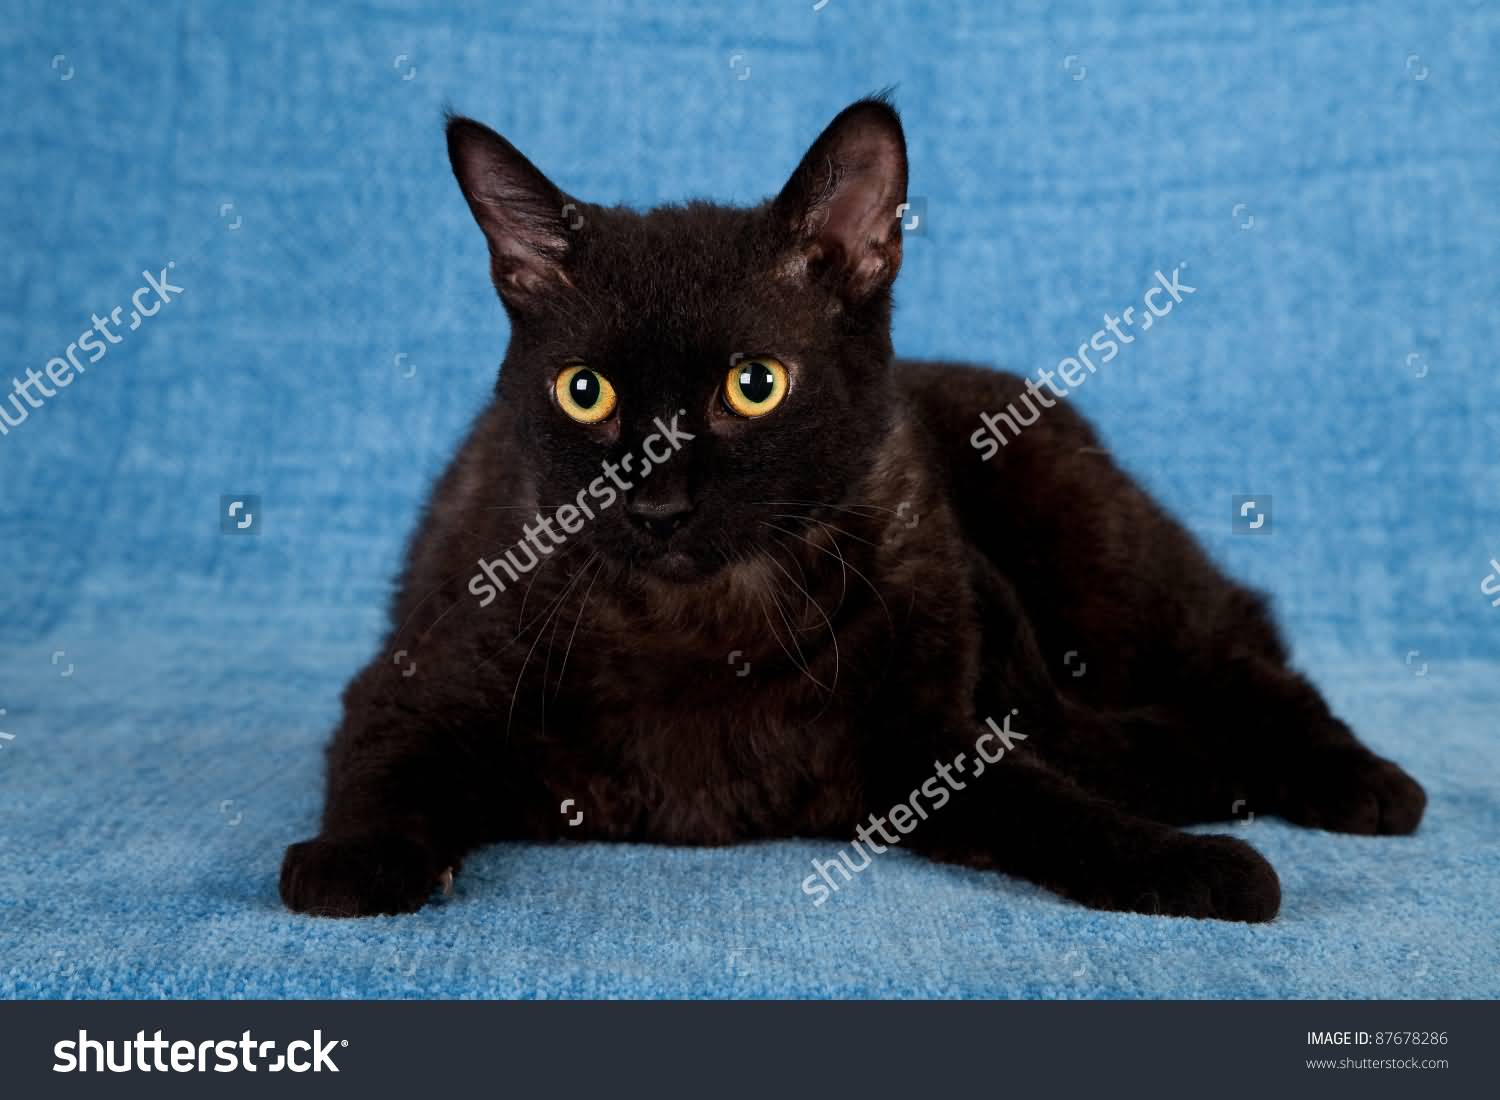 Cute Black LaPerm Cat With Yellow Eyes